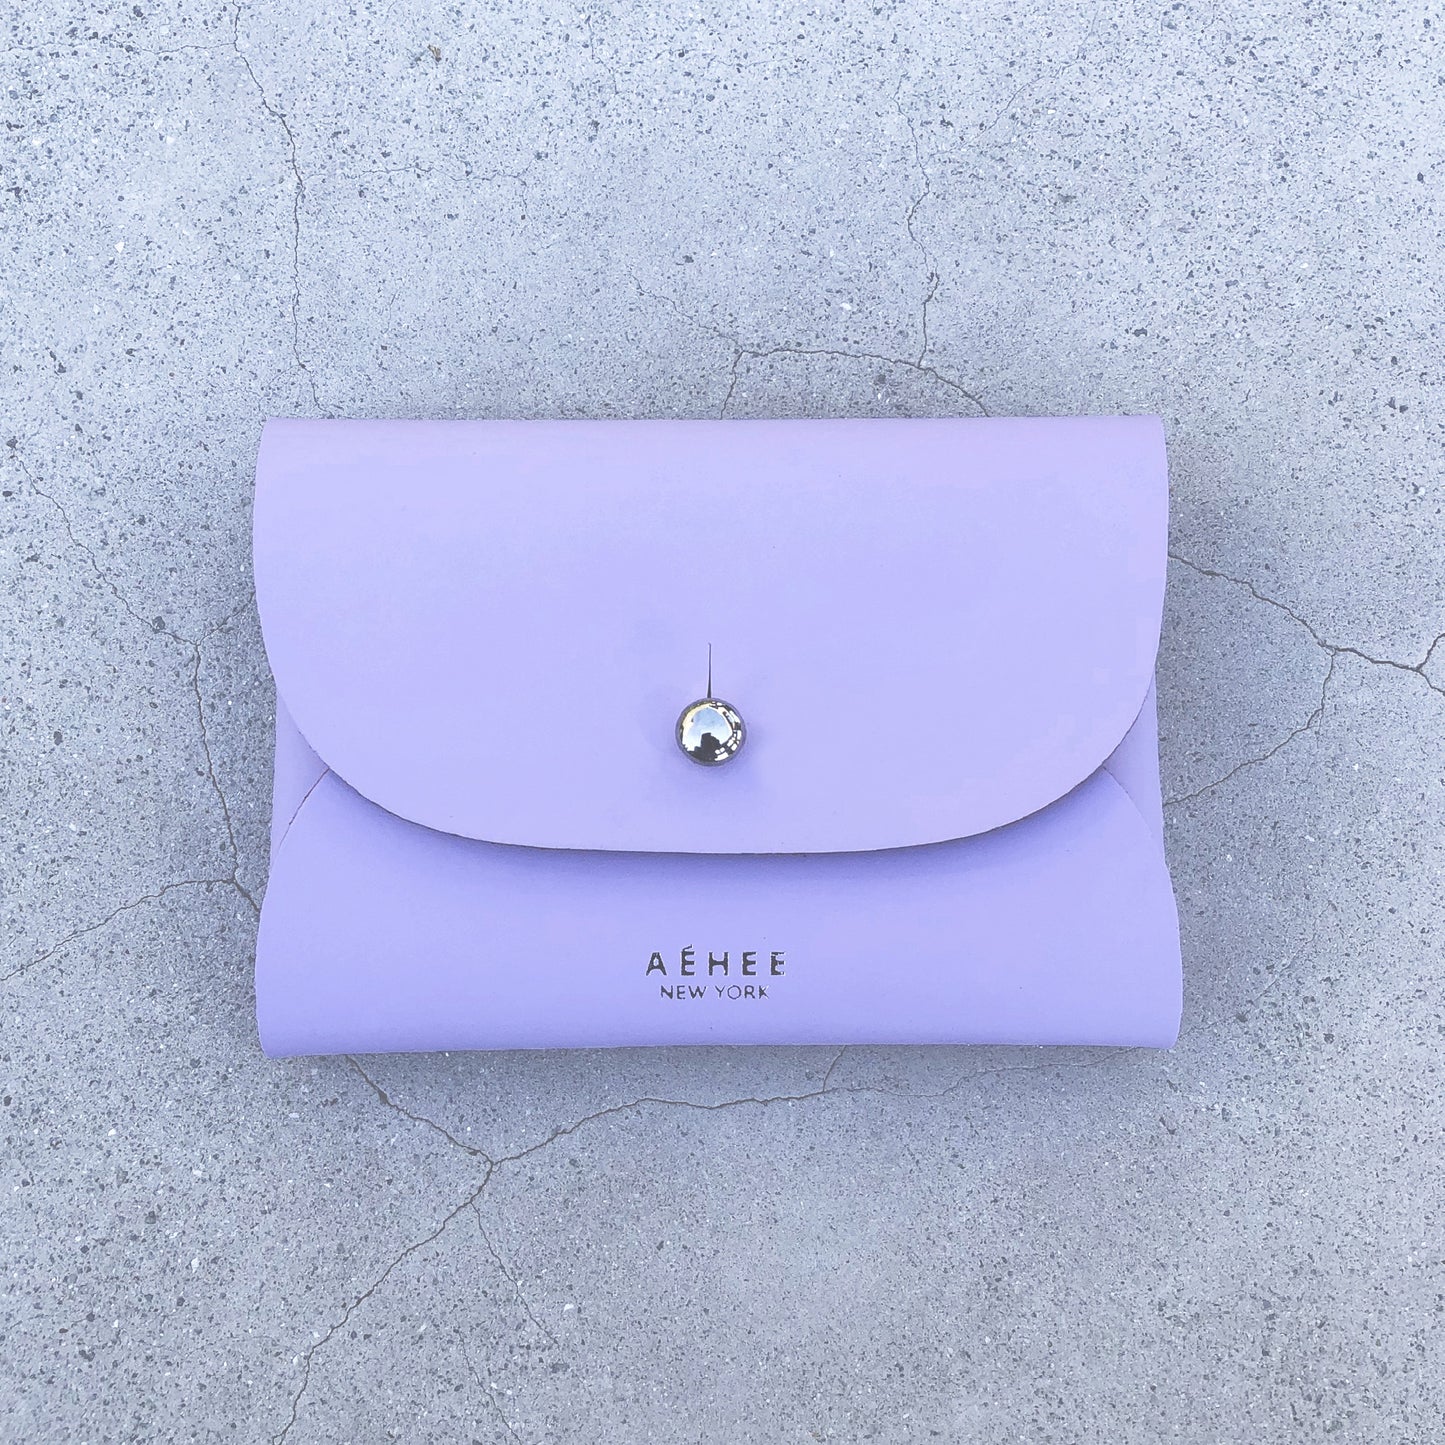 Chic lavender cardholder wallet crafted from Italian vegetable tanned leather for a minimal yet sophisticated look.